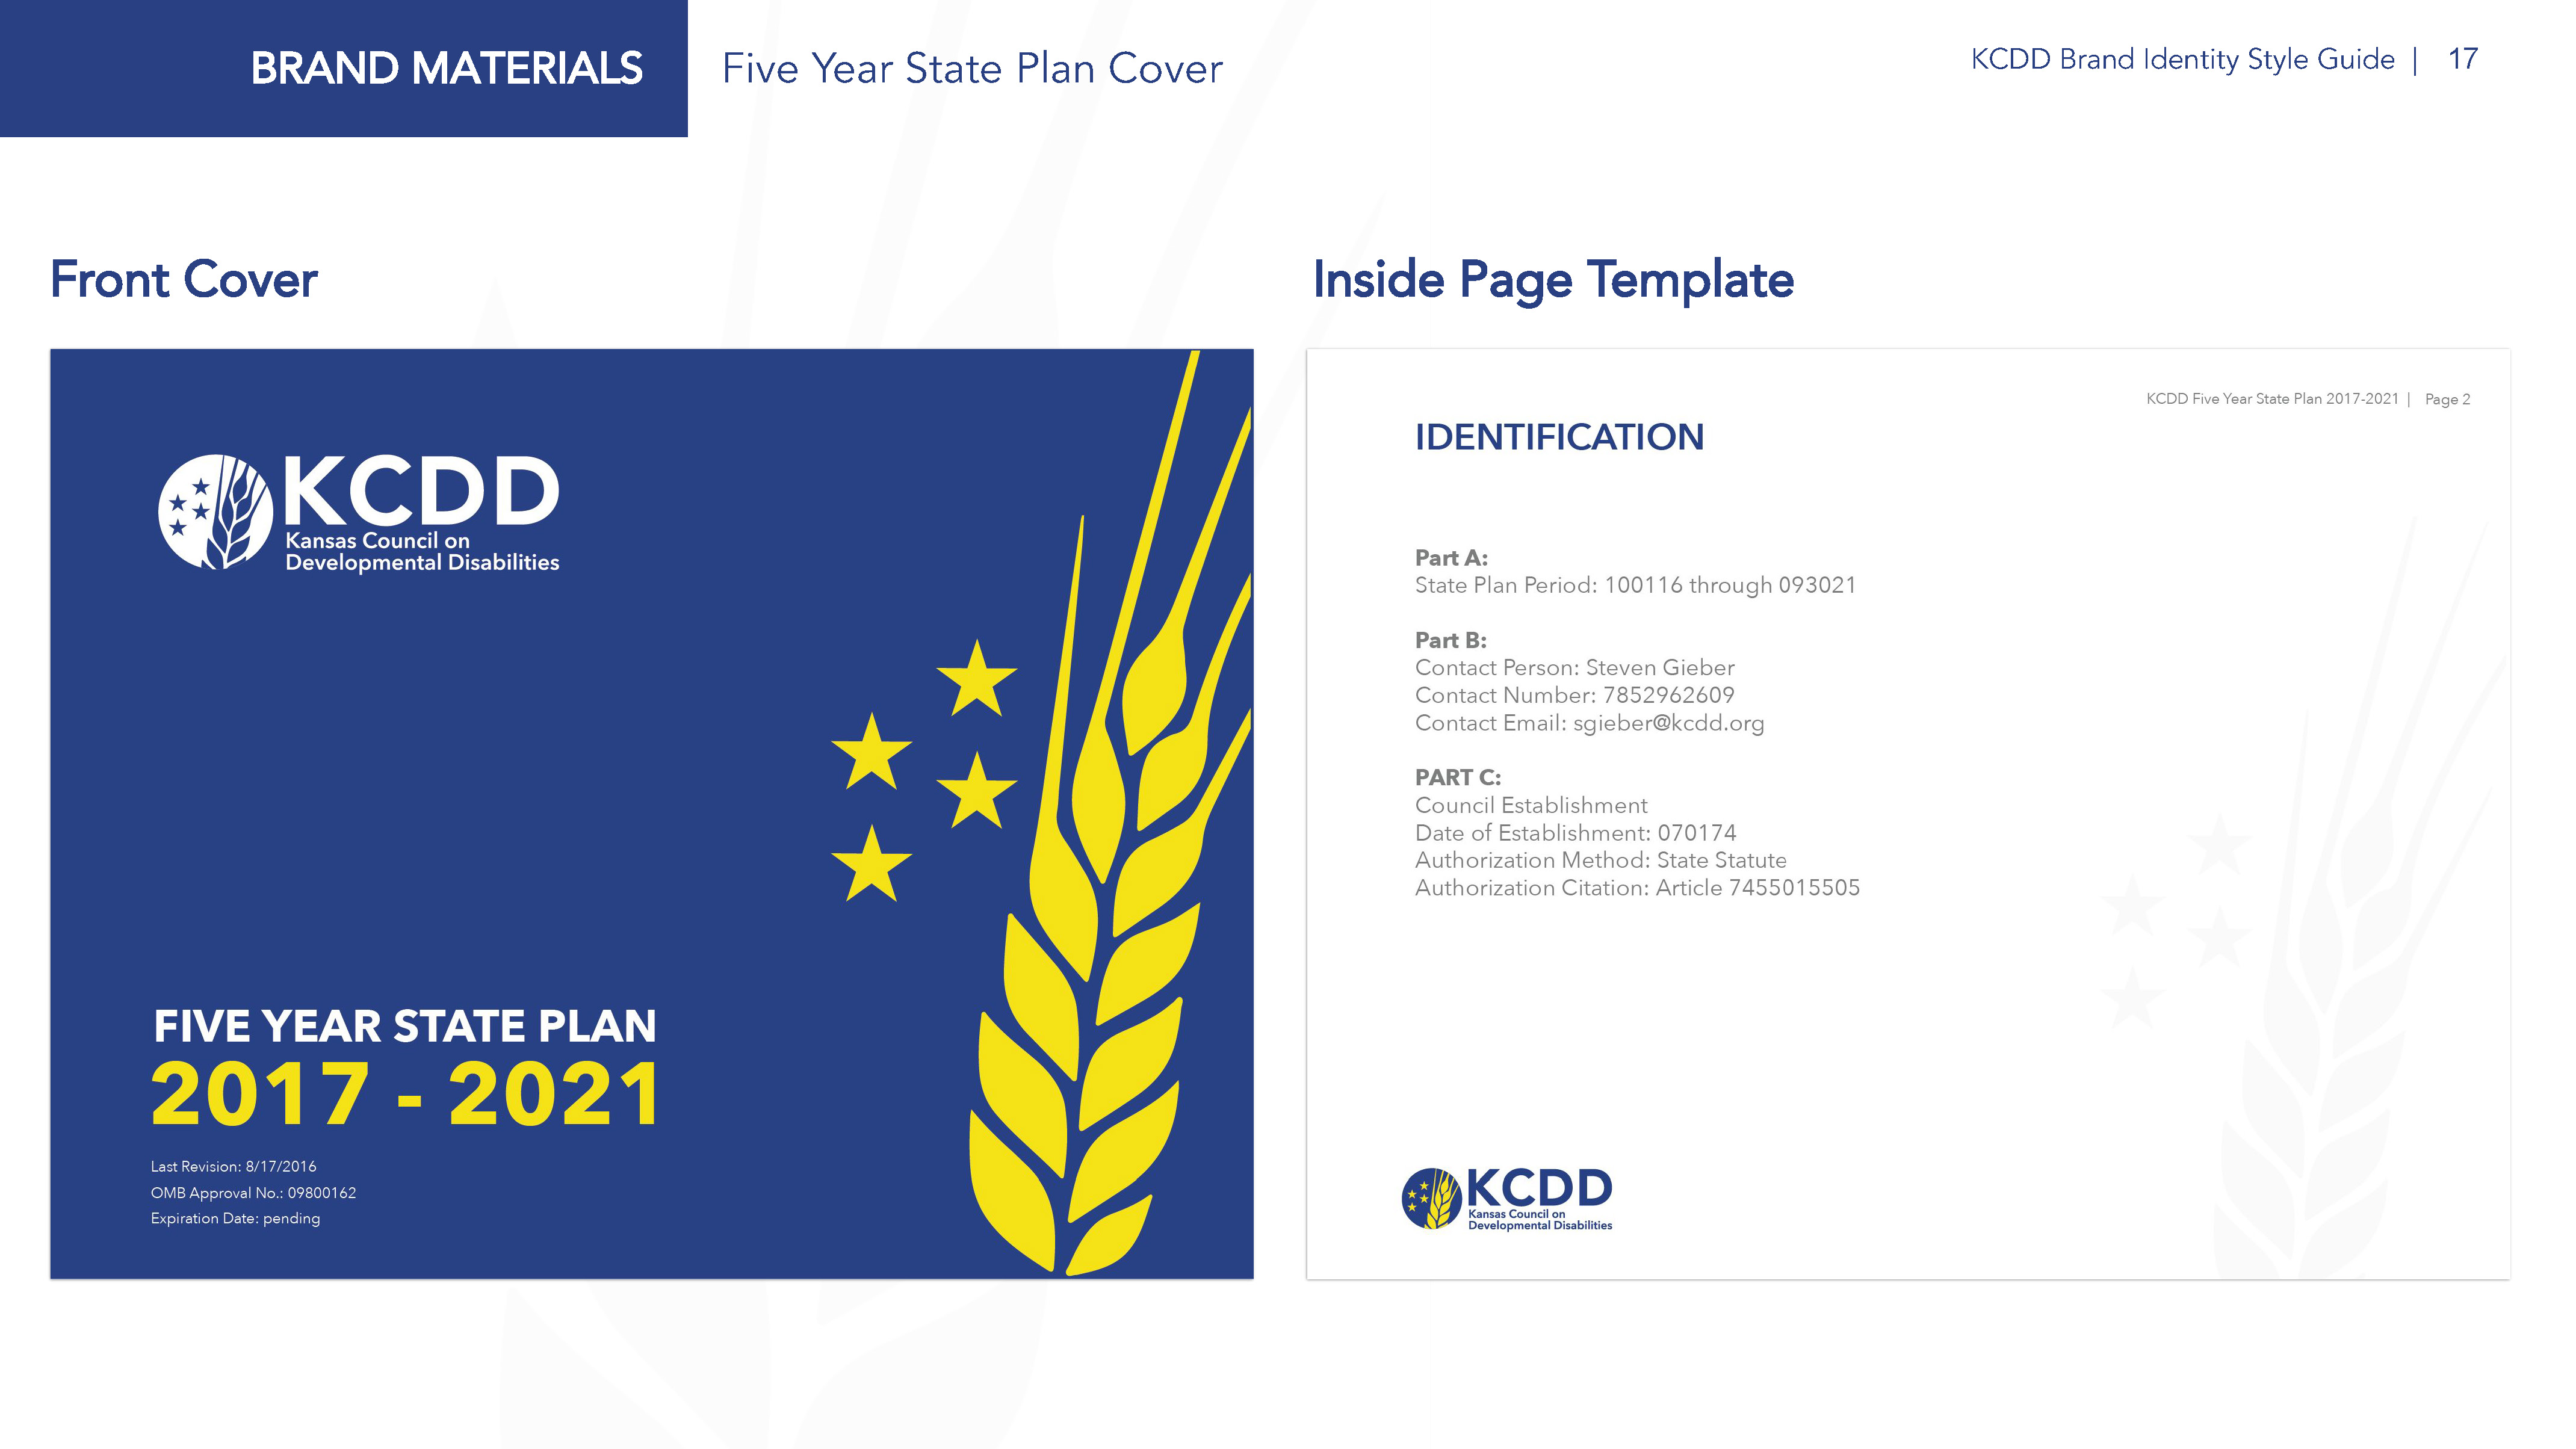 KCDD - KCDD Brand Identity Style Guide Page 17 - New Minds Group